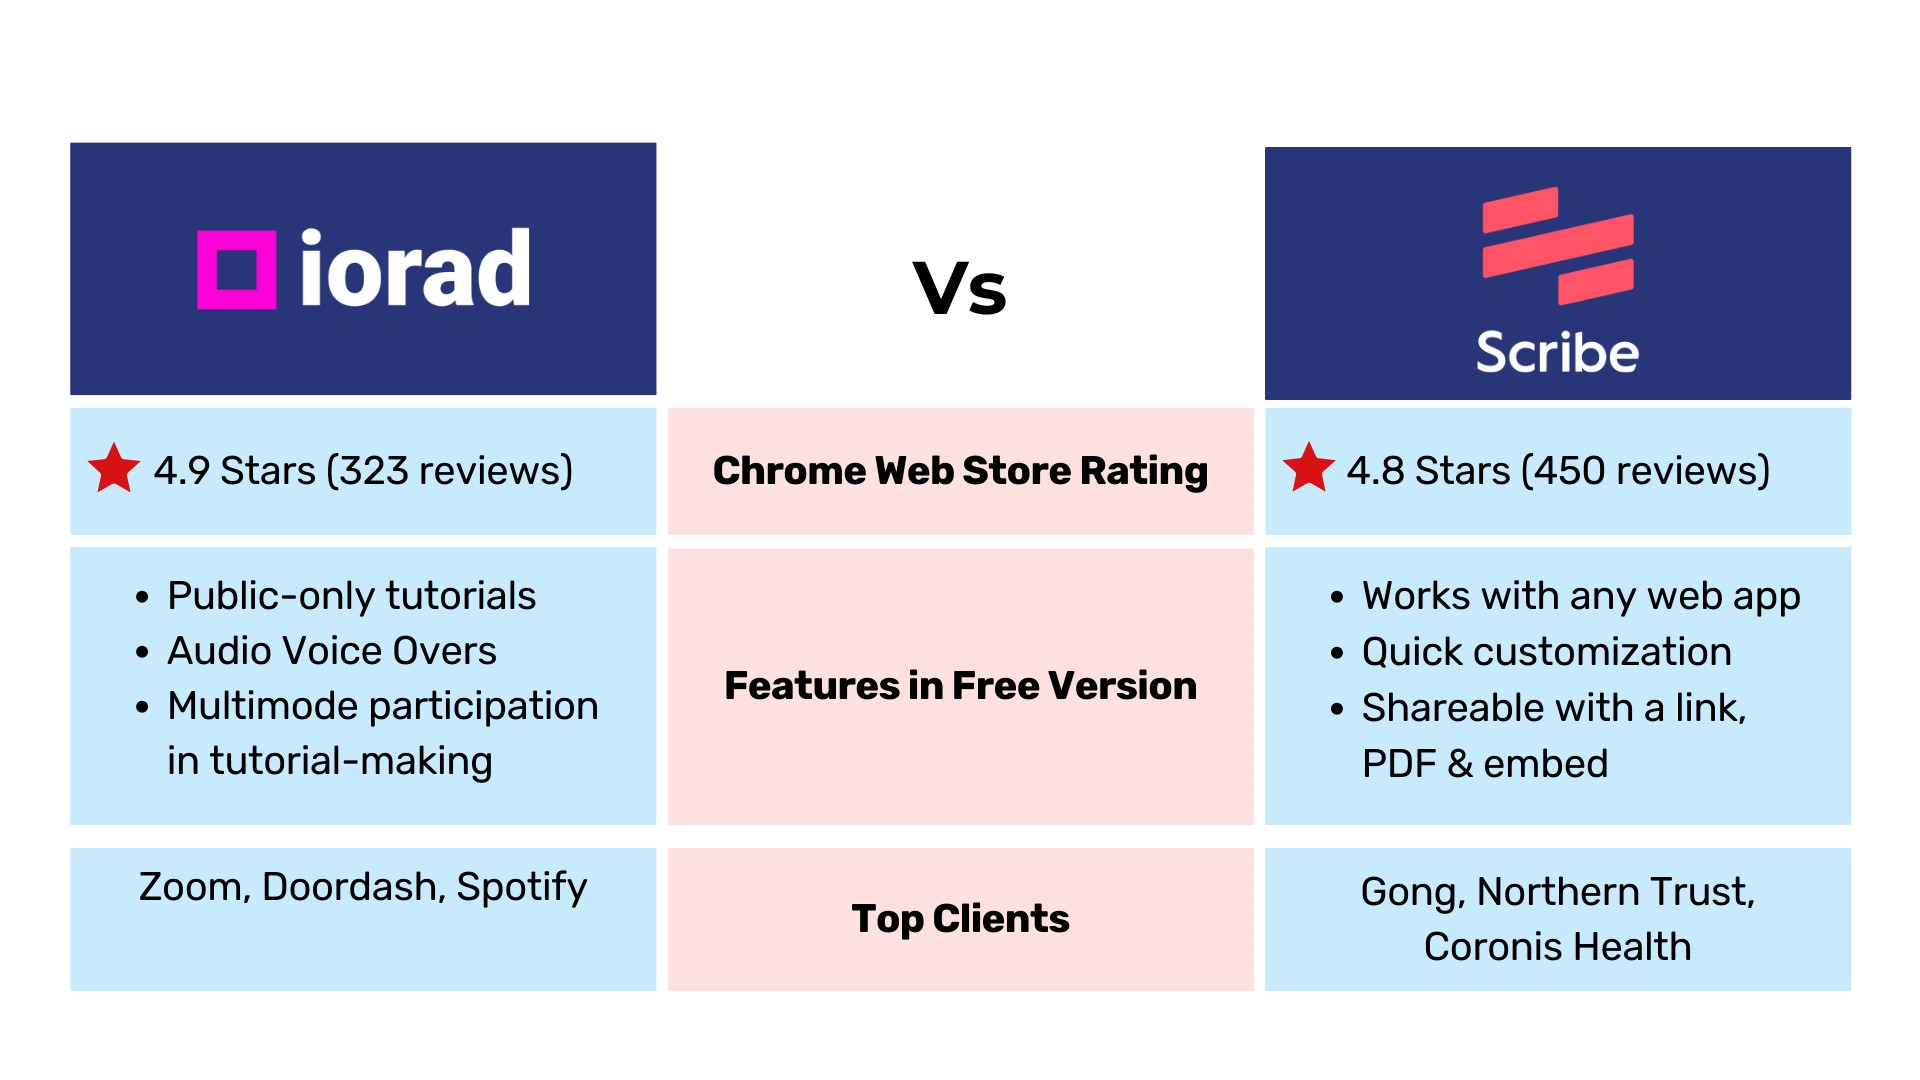 iorad Vs Scribe comparison table with rating, features, top clients